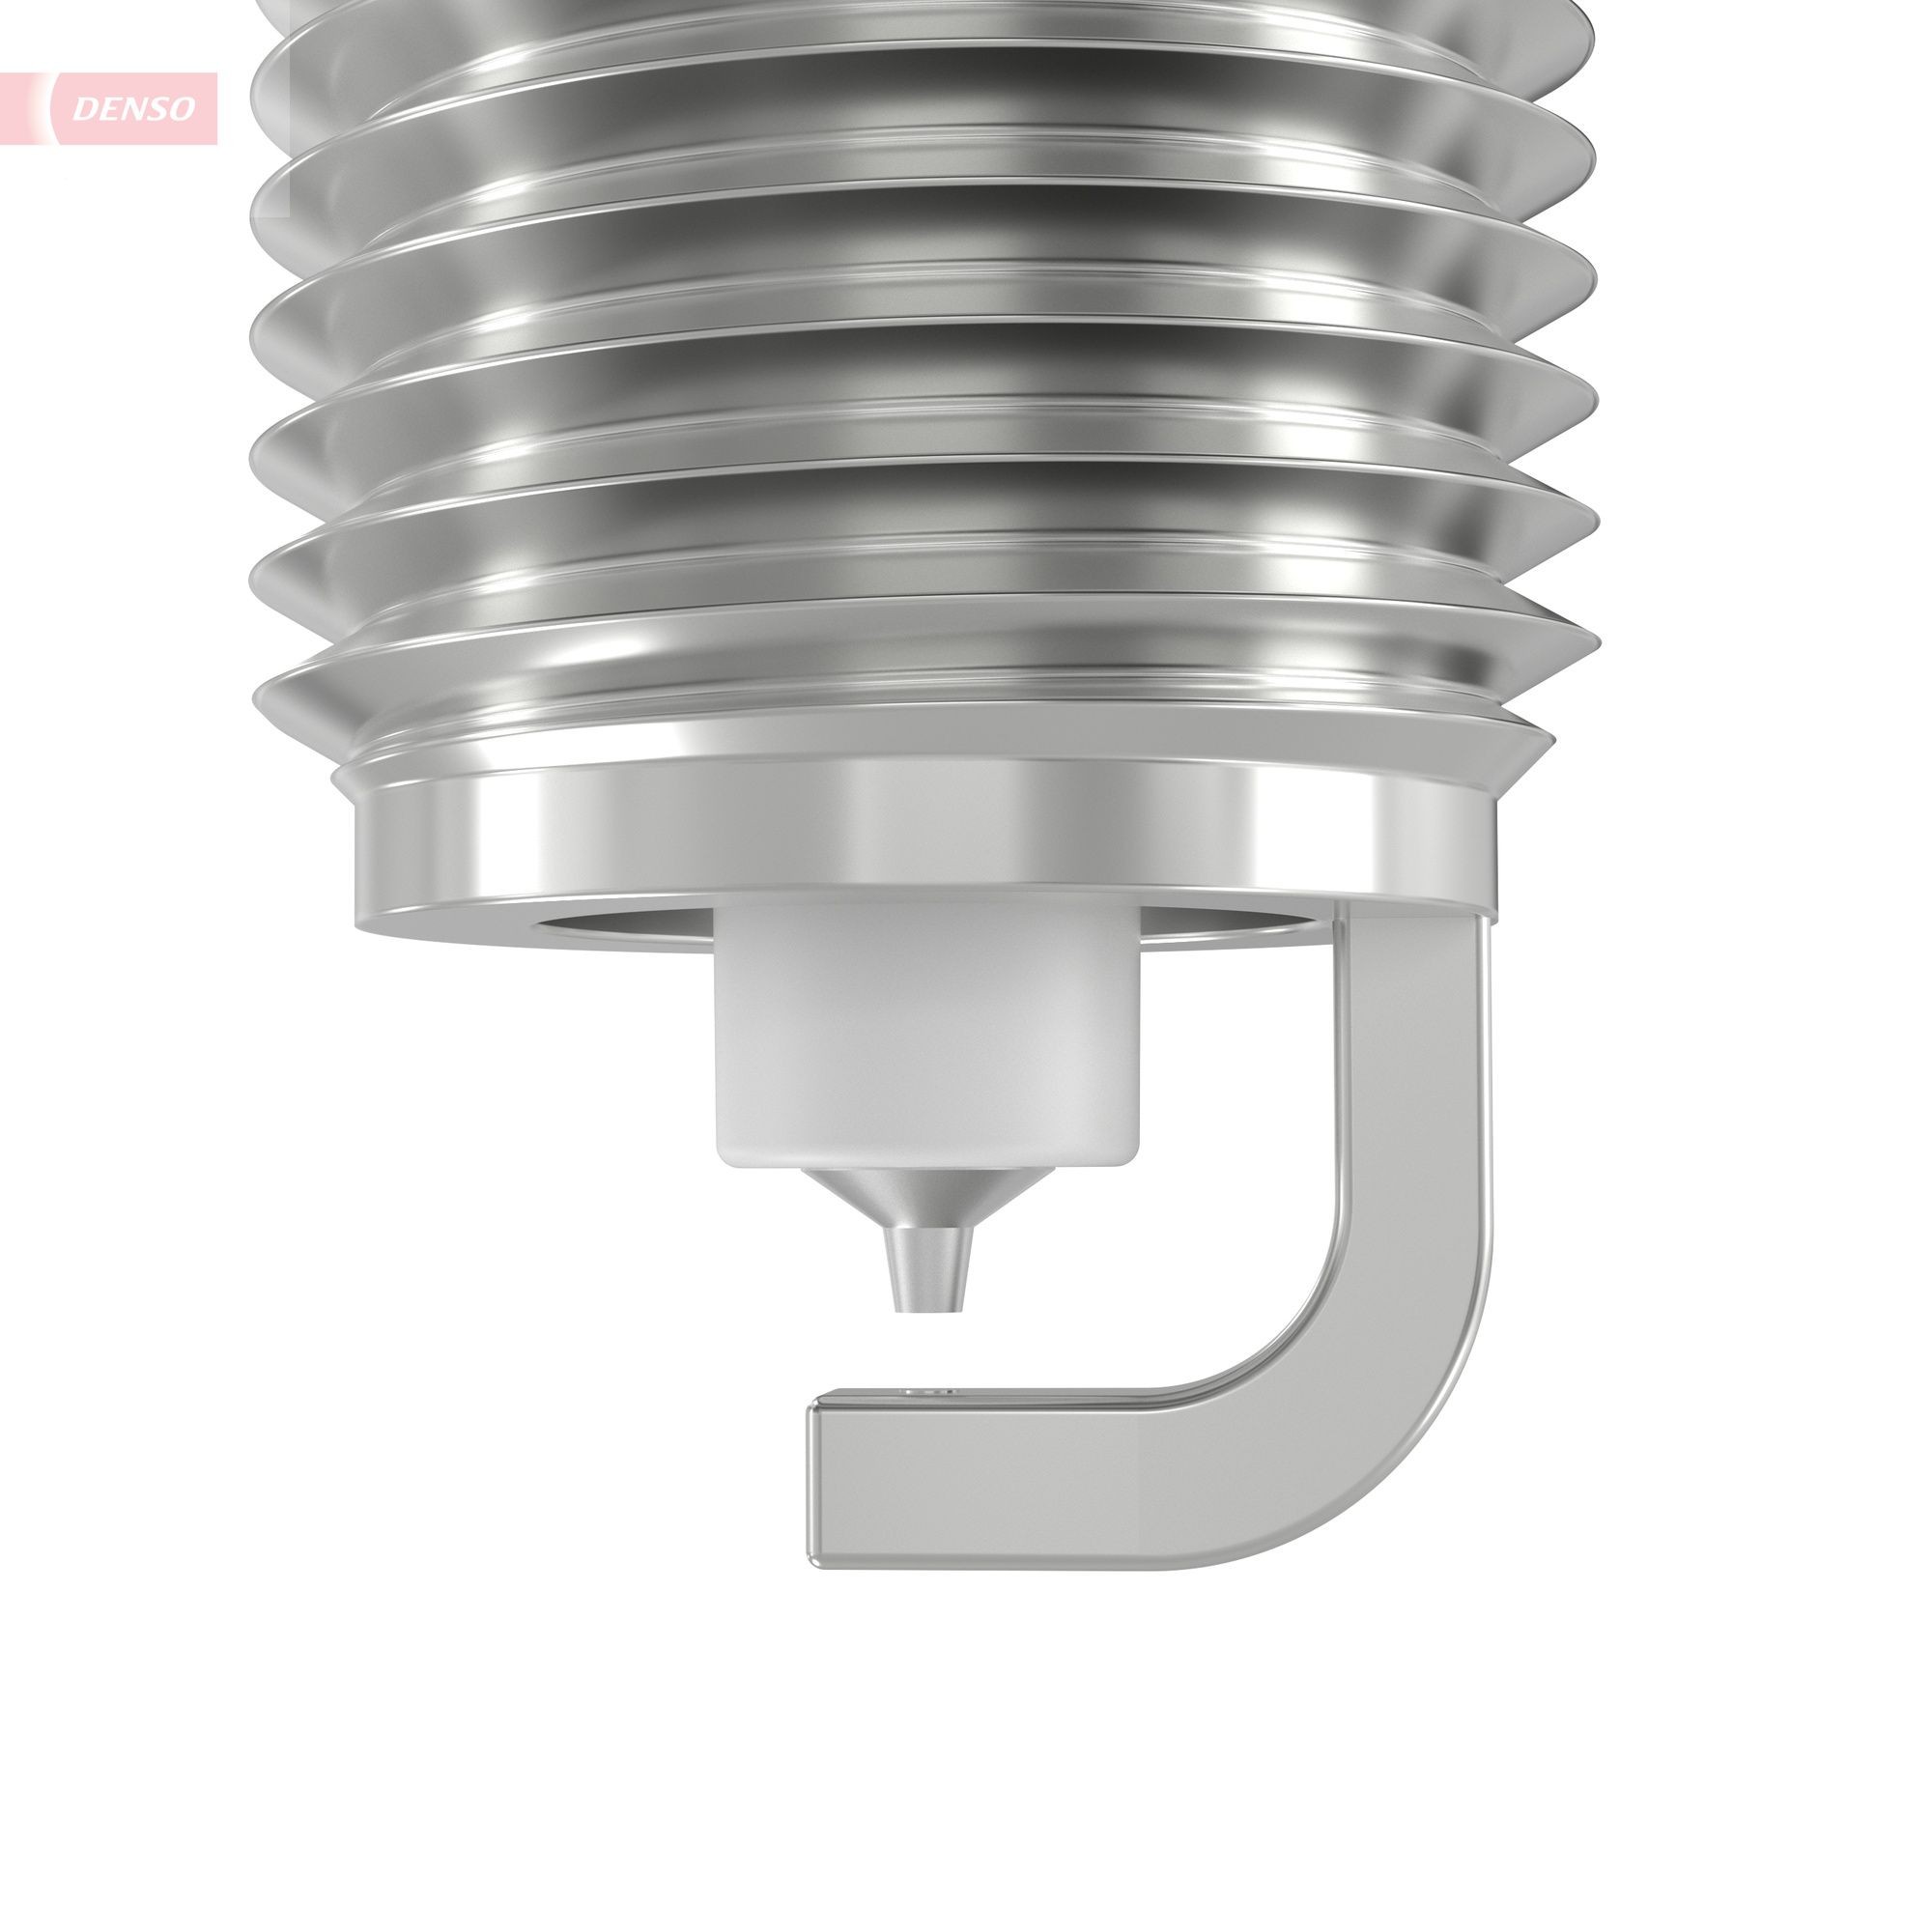 Spark plug SK16R-P11 from DENSO